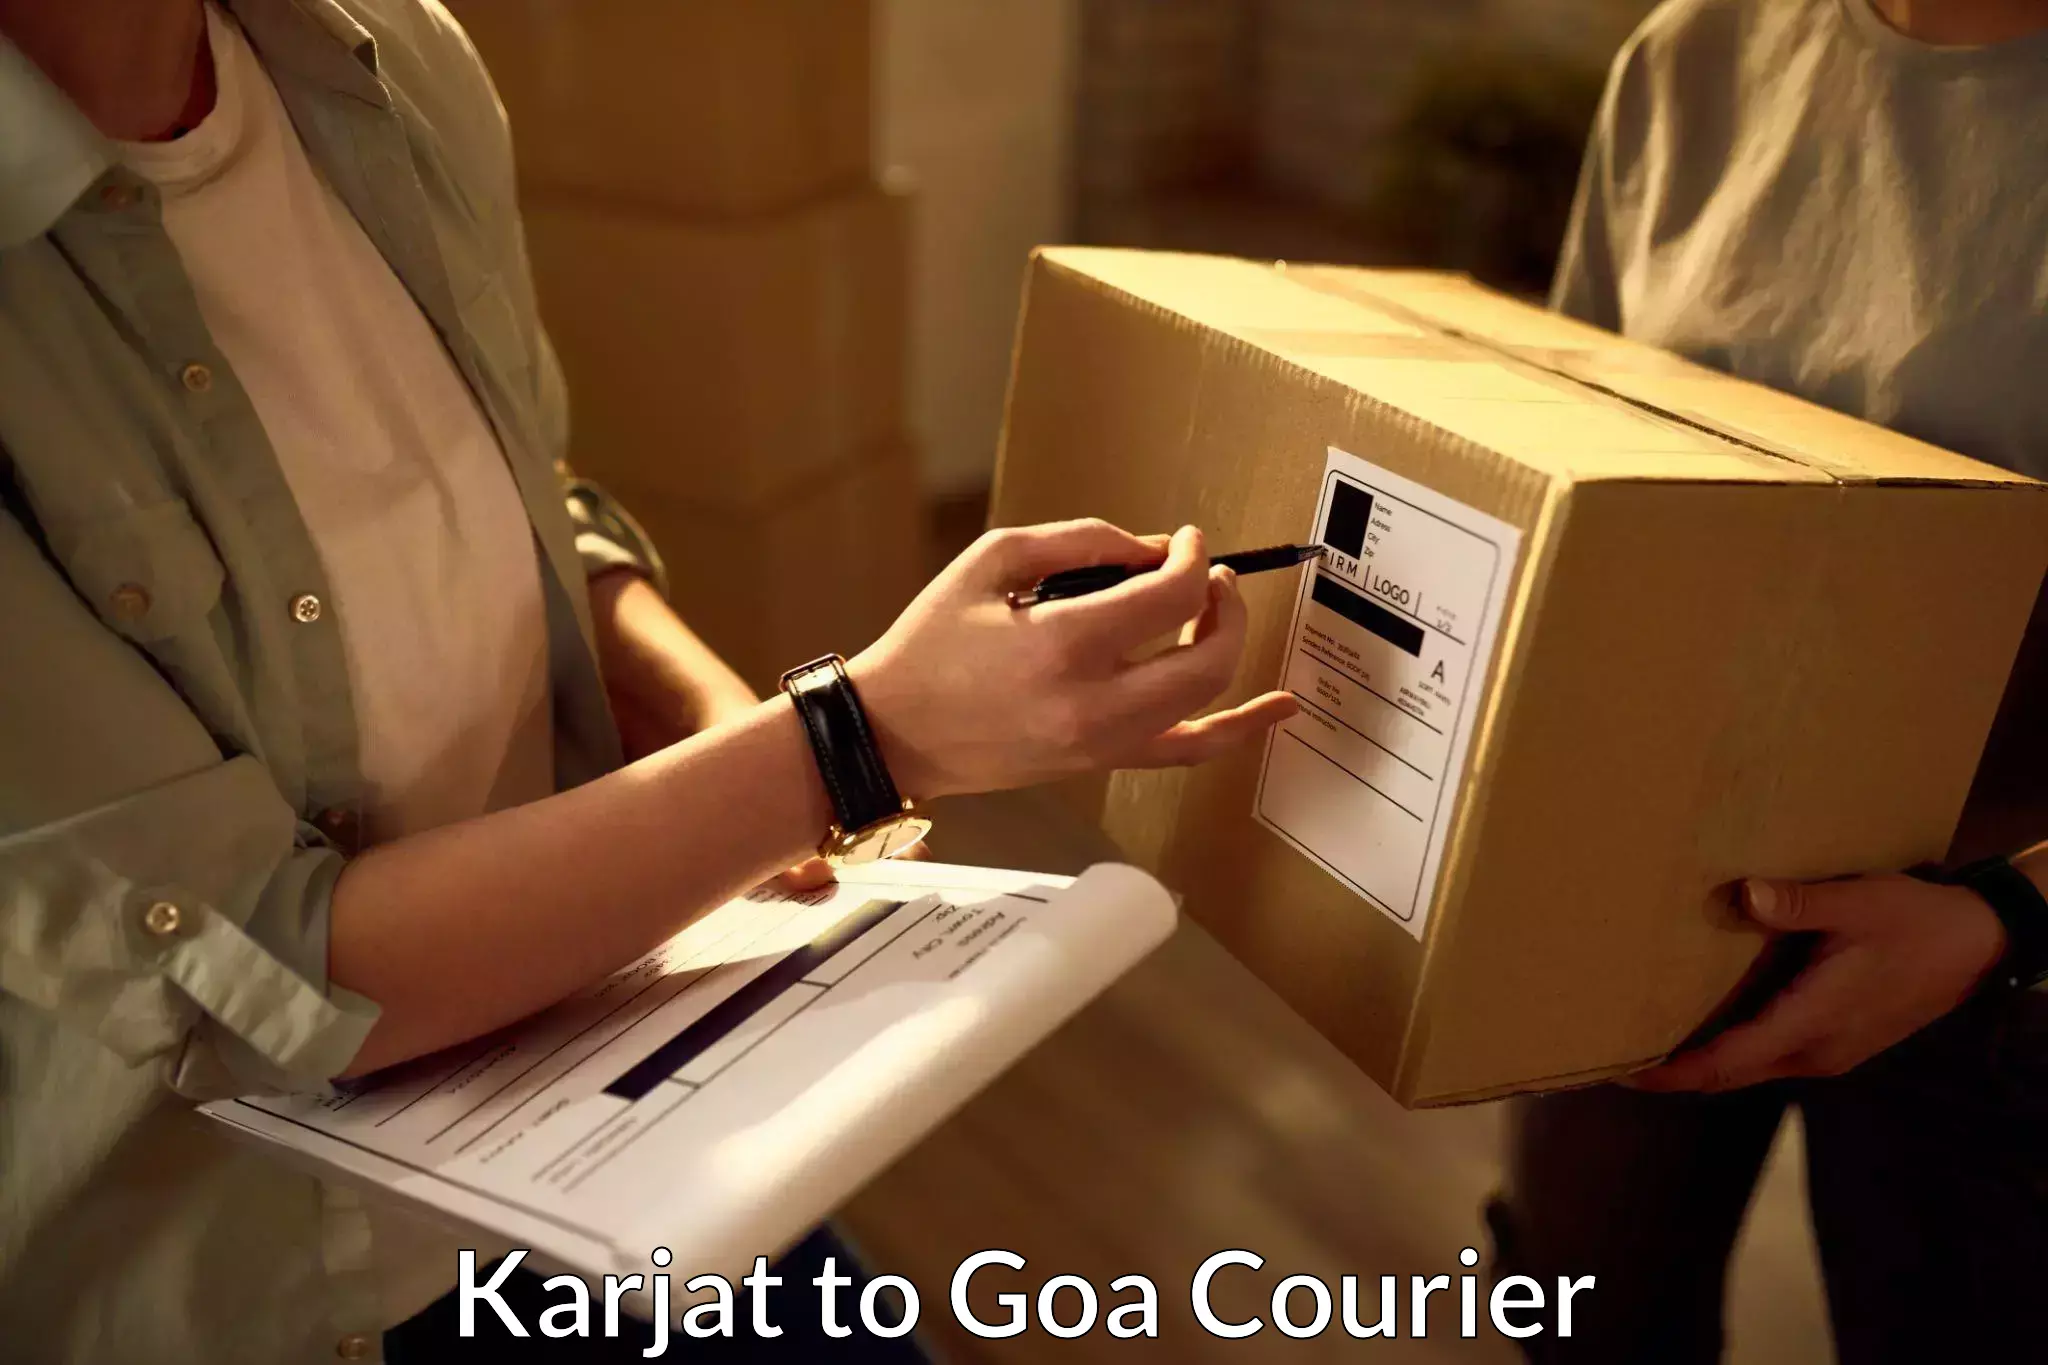 Courier service comparison in Karjat to Bardez